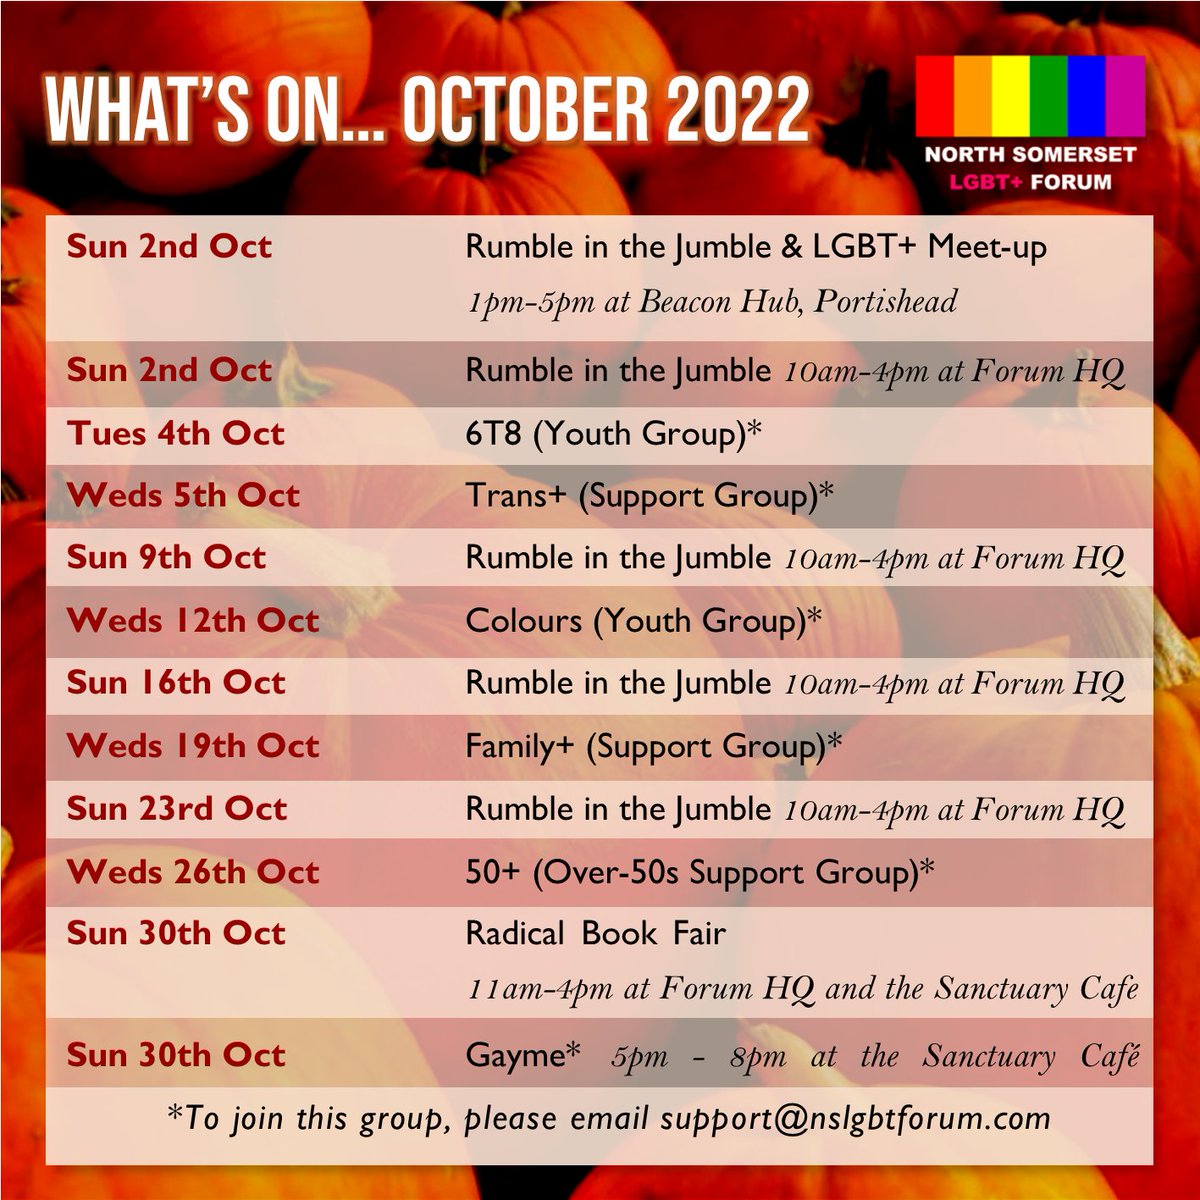 Check out what we have planned for October! If you or someone you know wishes to join one of our support groups, please email support@nslgbtforum.com before attending. See you soon!